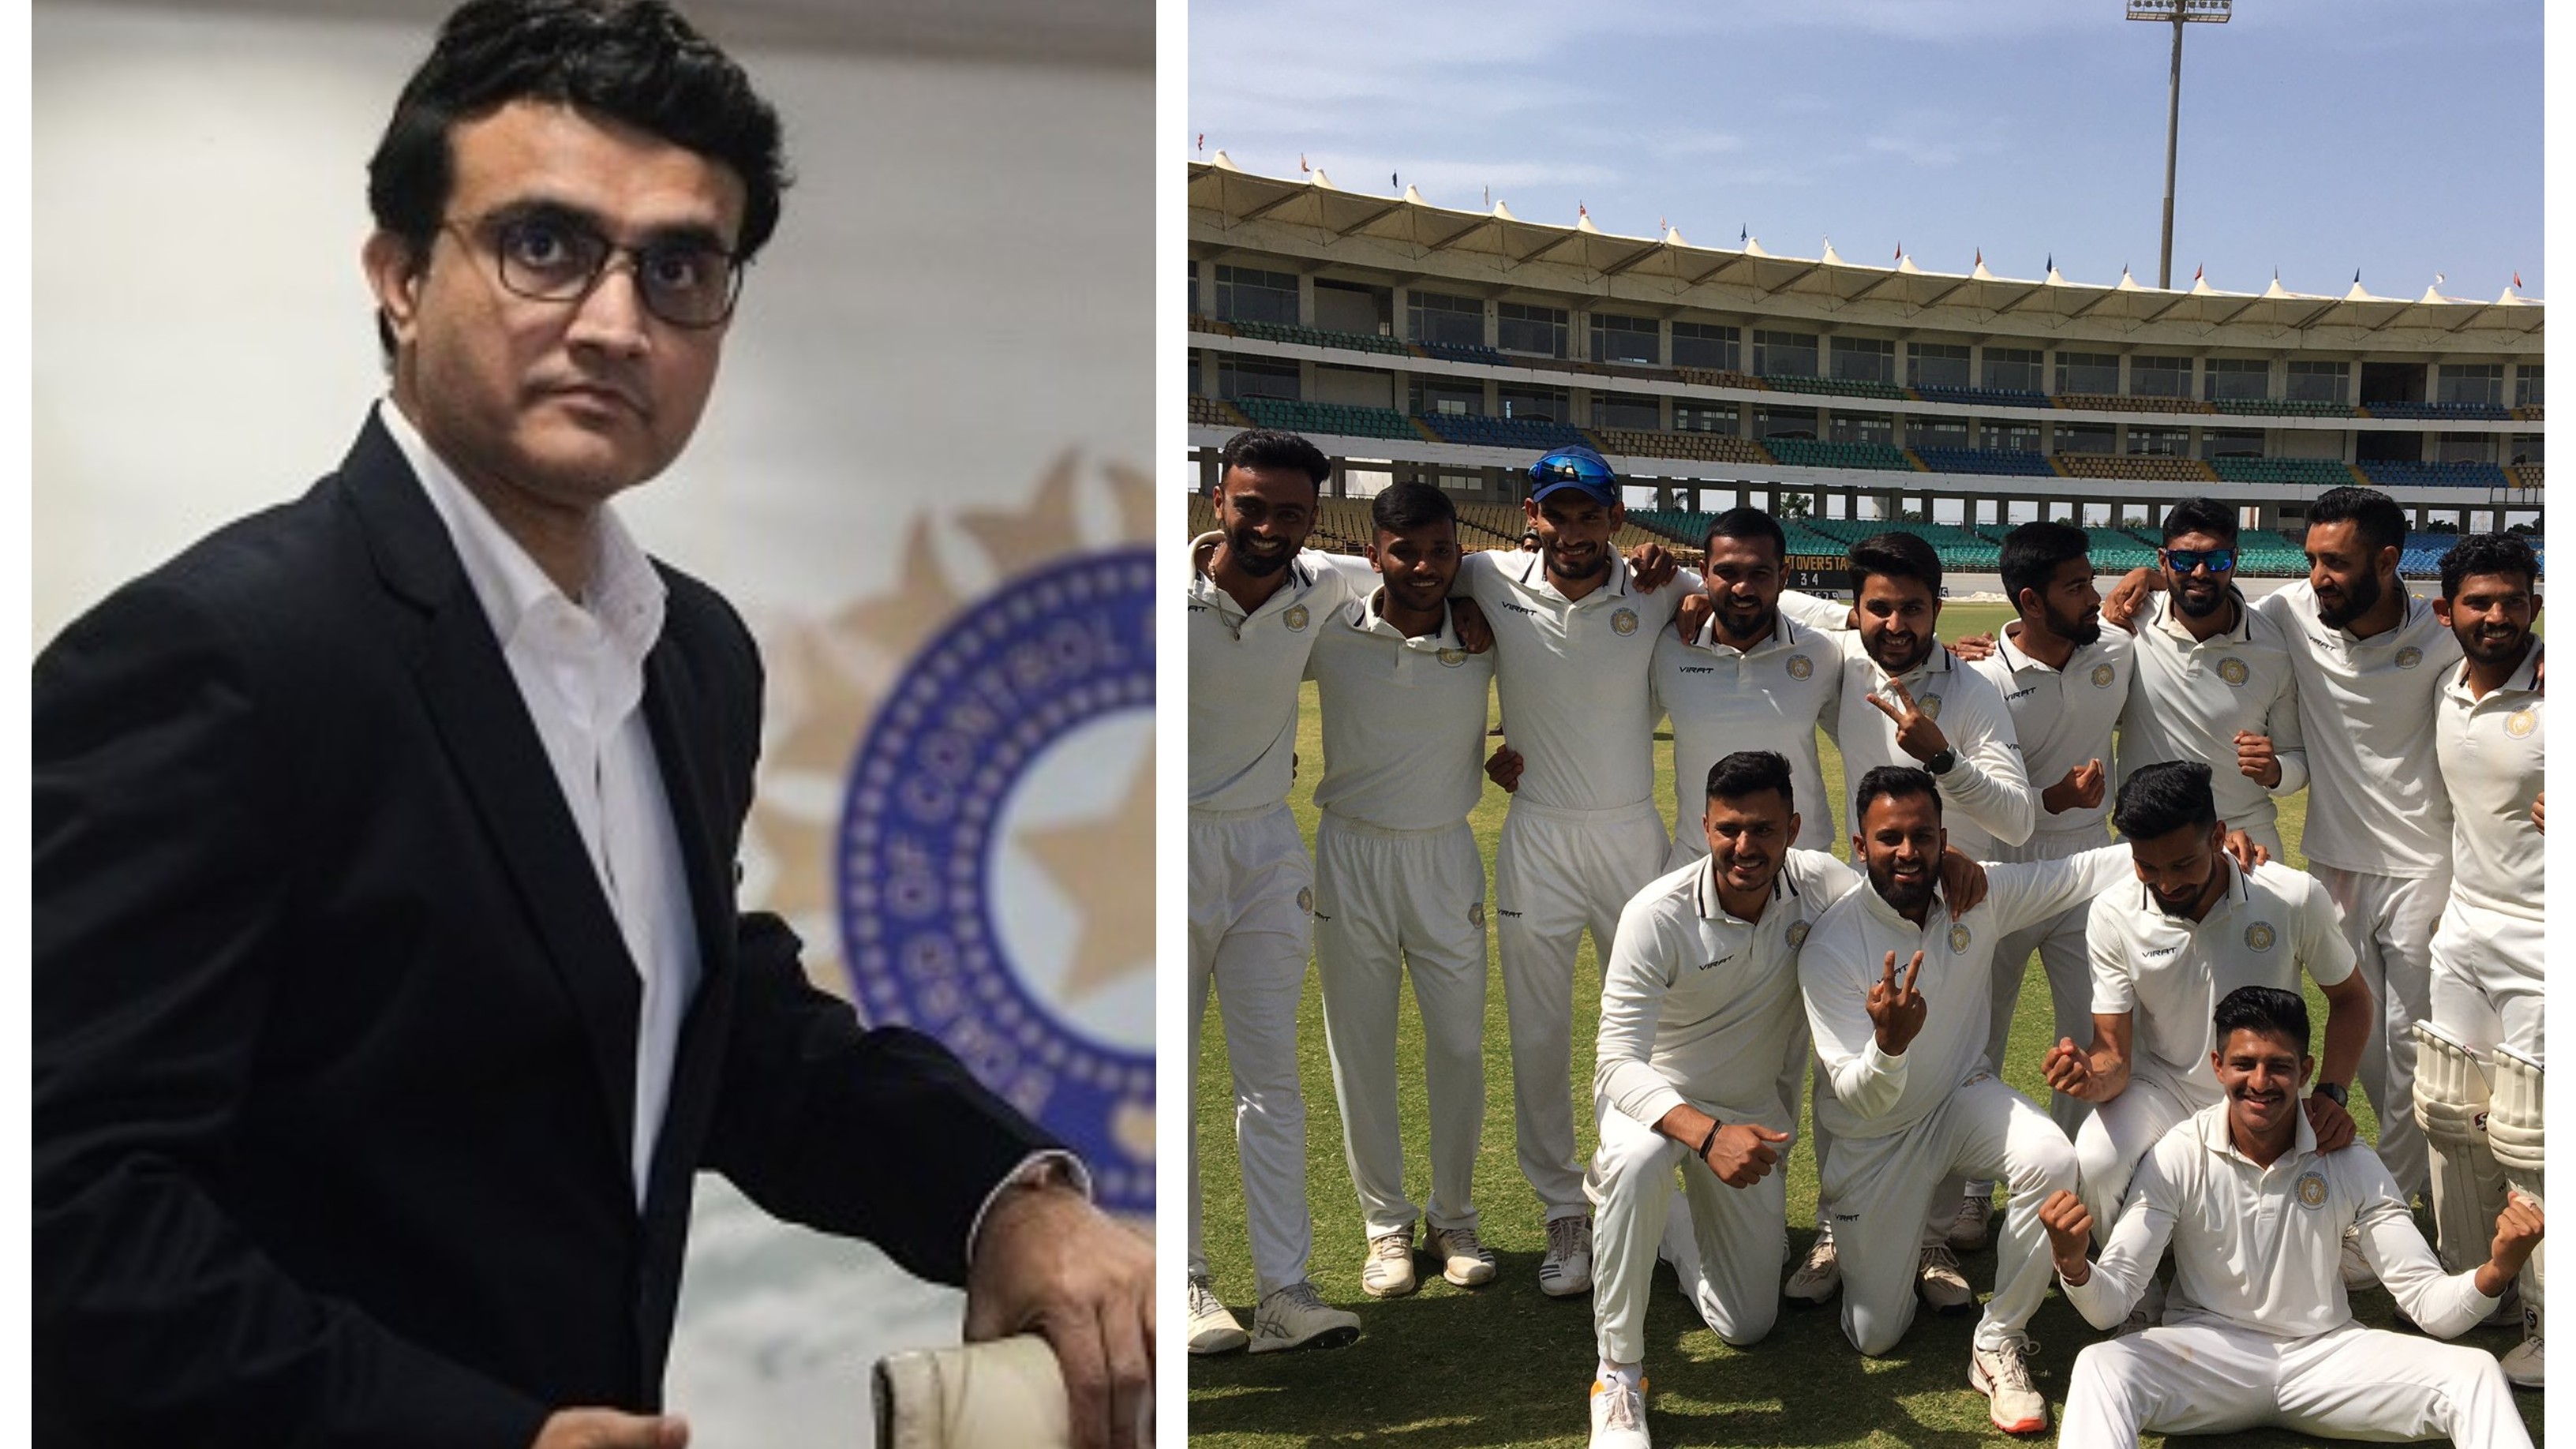 BCCI President Sourav Ganguly remains non-committal about the fate of India’s domestic season